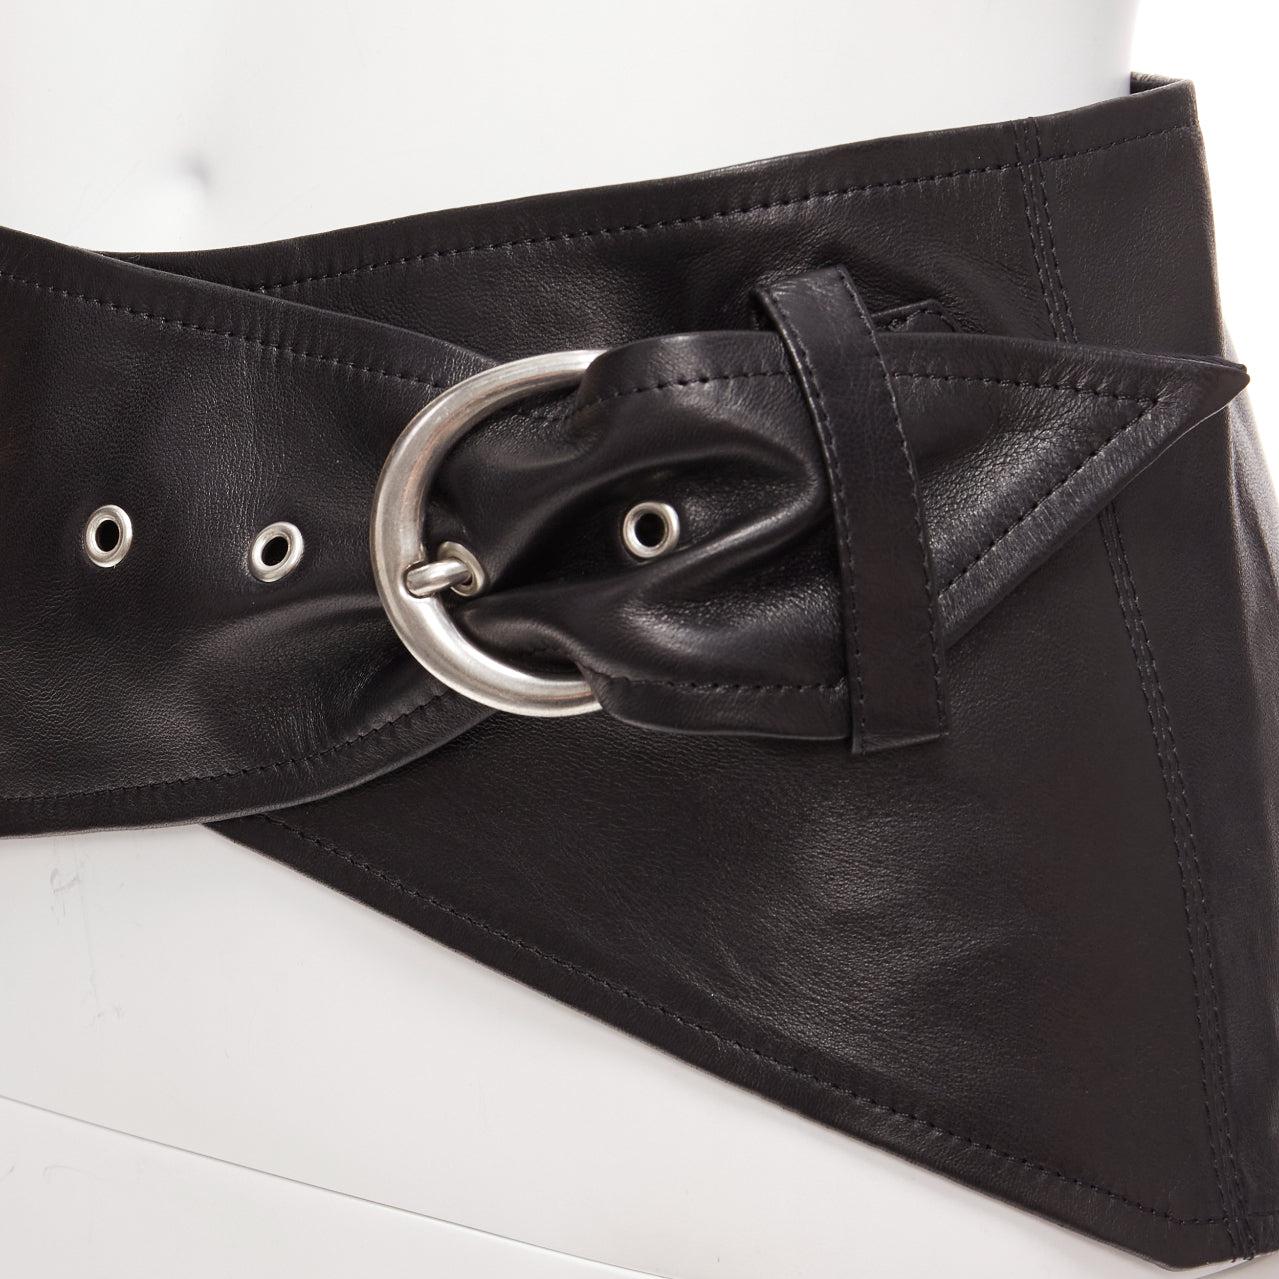 ISABEL MARANT Mosa black calf leather silver metal ring cotton lined belt 70cm
Reference: AAWC/A01208
Brand: Isabel Marant
Model: Mosa
Material: Leather
Color: Black, Silver
Pattern: Solid
Closure: Belt
Lining: Black Cotton
Extra Details: Cotton